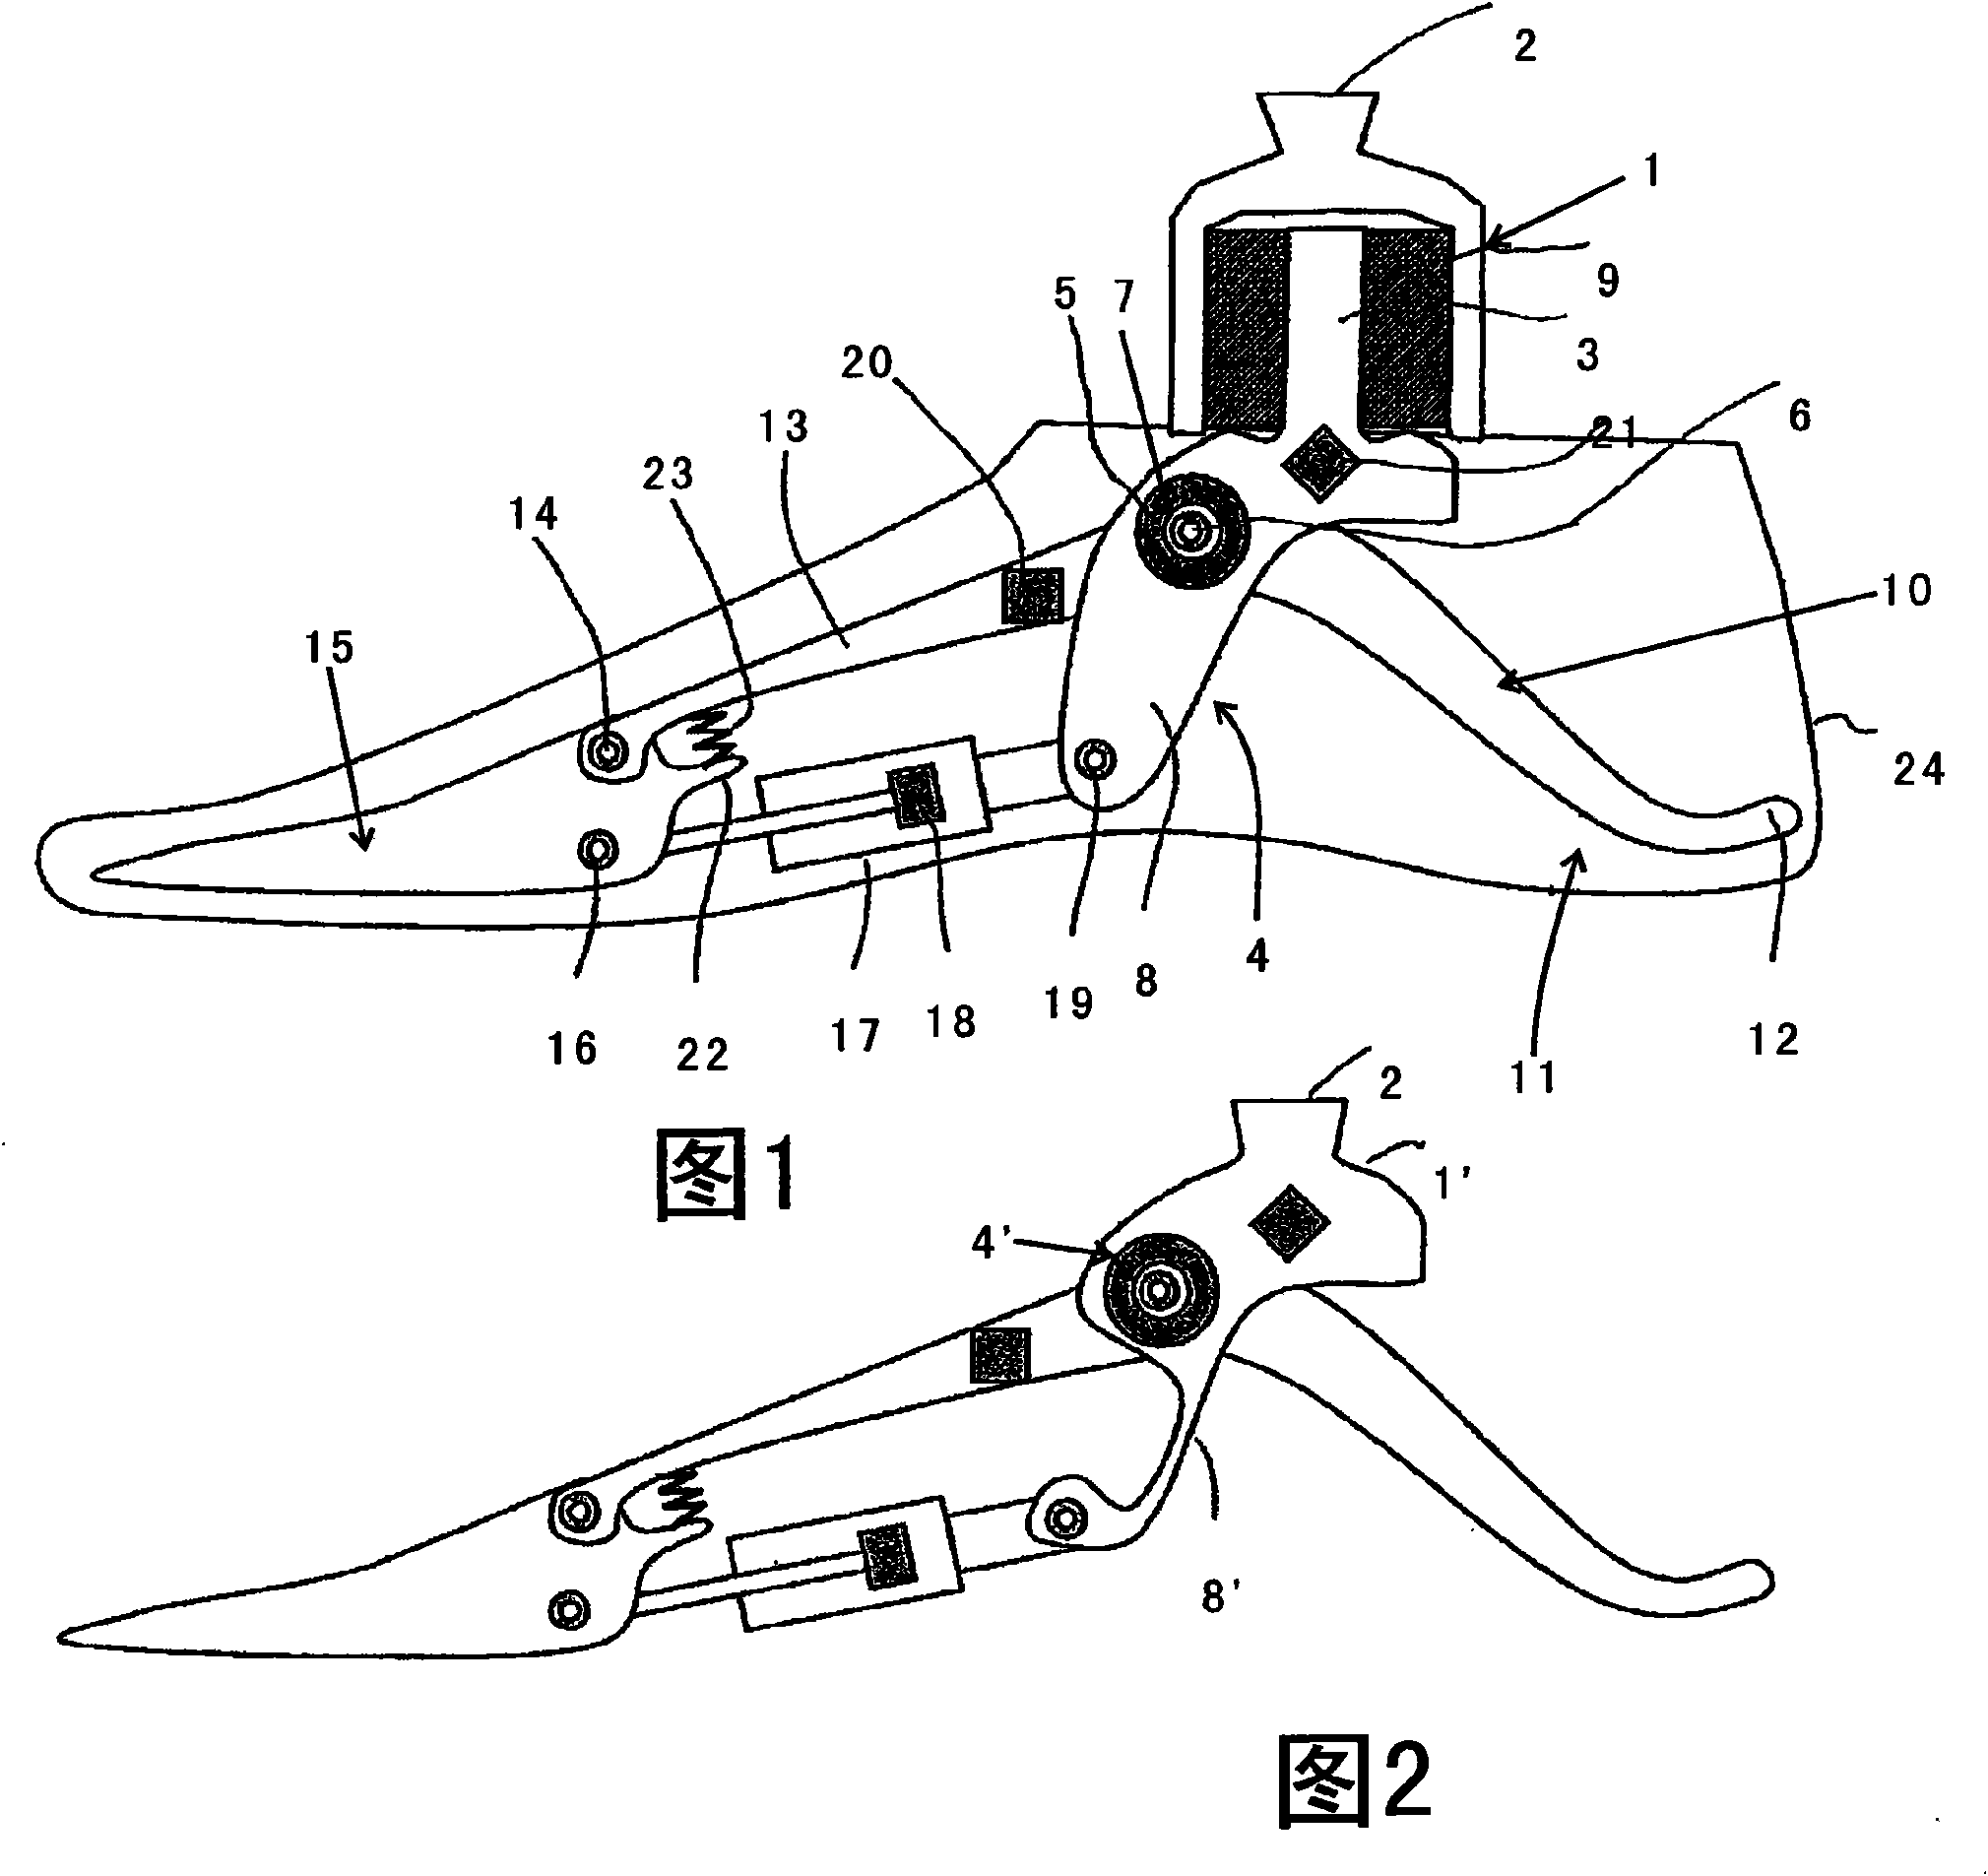 Orthopaedic foot component and method for controlling an artificial foot